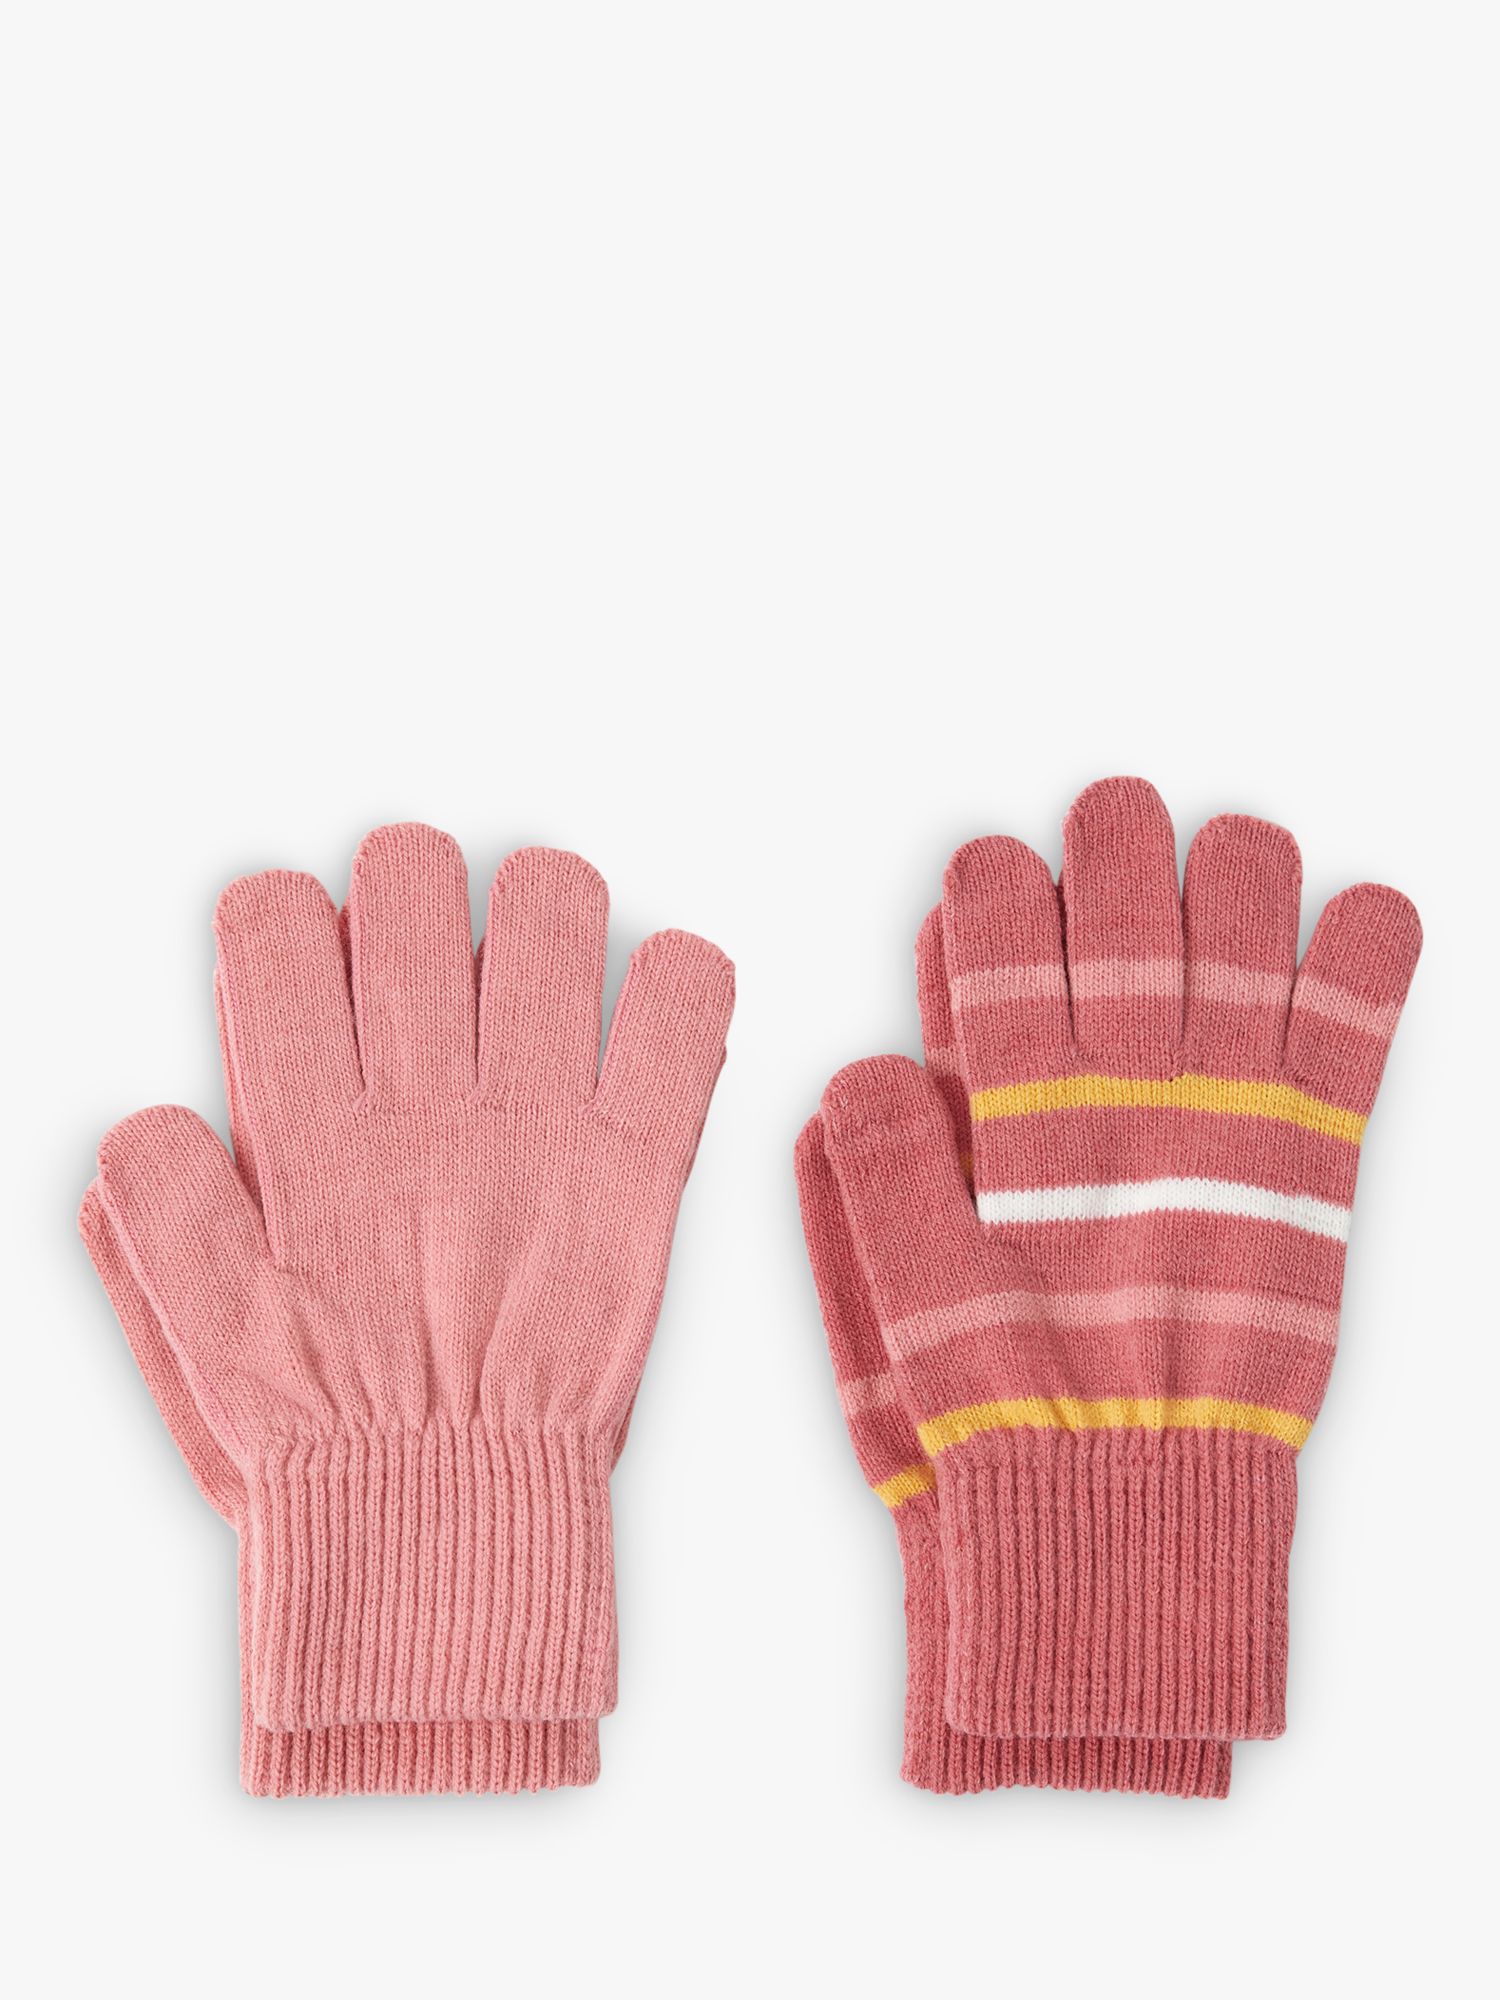 Buy Polarn O. Pyret Kids' Magic Mittens, Pack of 2 Online at johnlewis.com